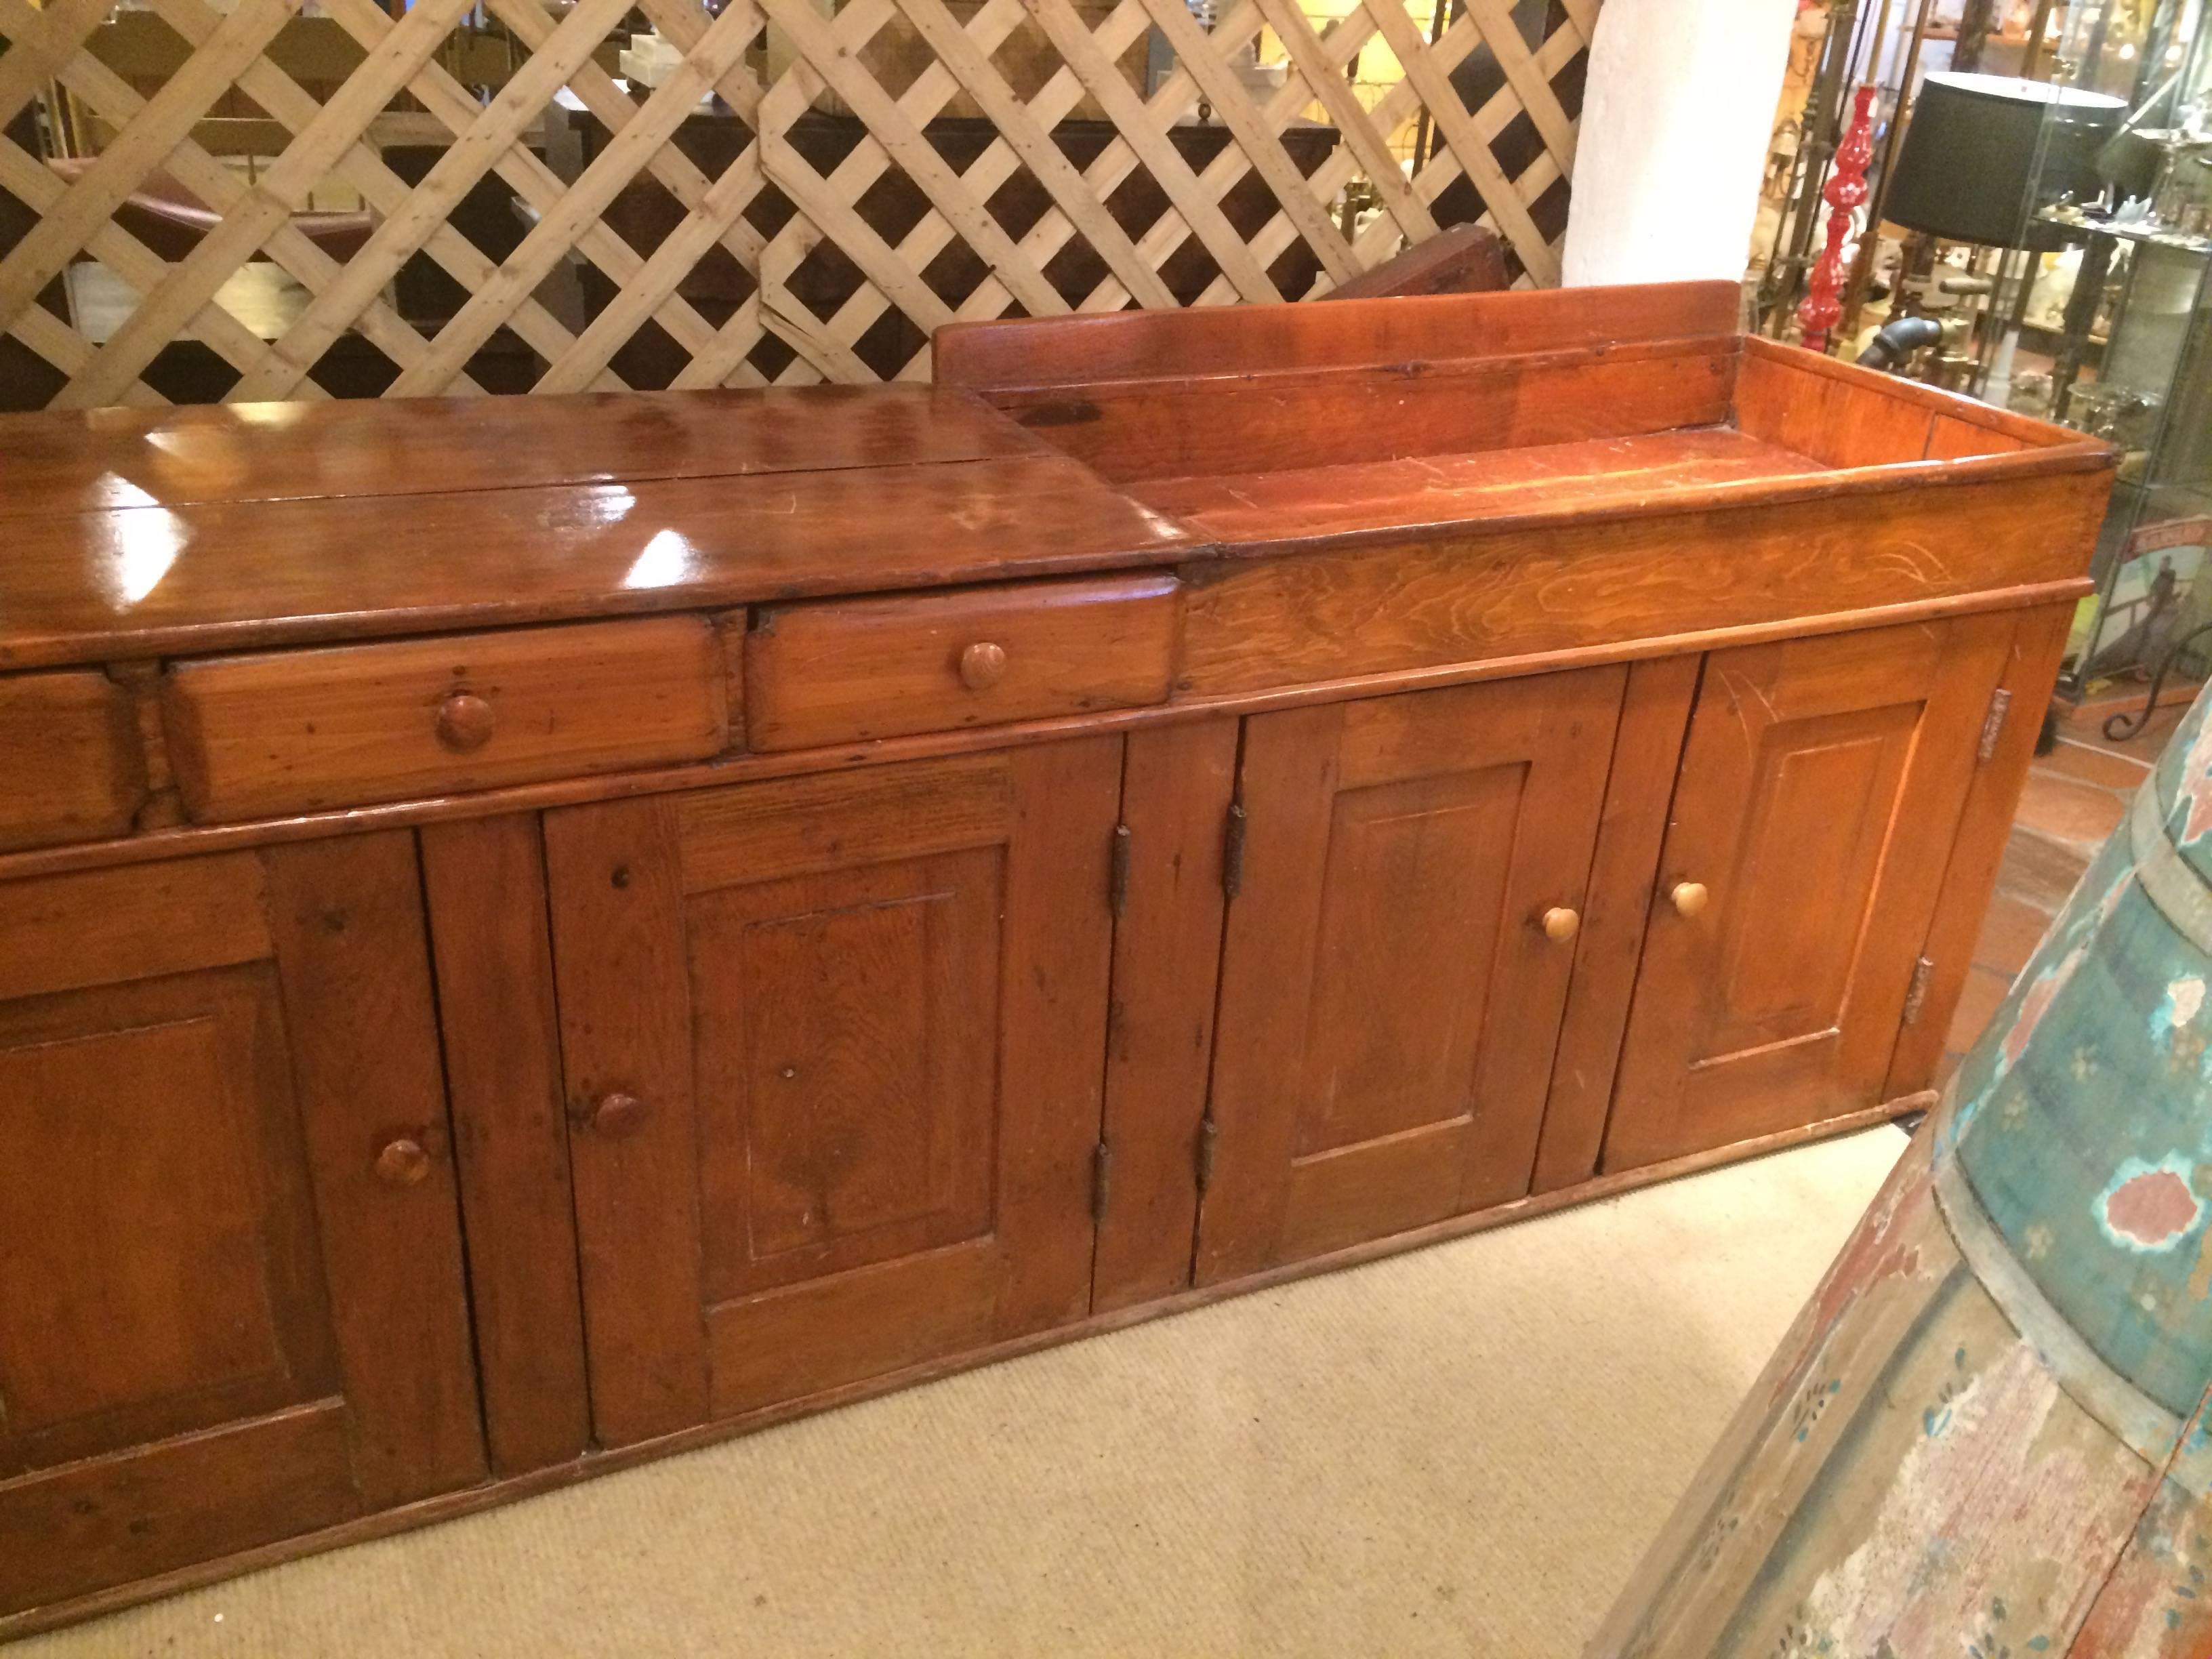 A spectacularly long and rare vintage dry sink cabinet having a rectangular sink measuring 41.5 L x 4.5 H, with tons of storage including 3 drawers and two sets of panelled doors that open to shelves inside. Top is pine and bottom may be ash.